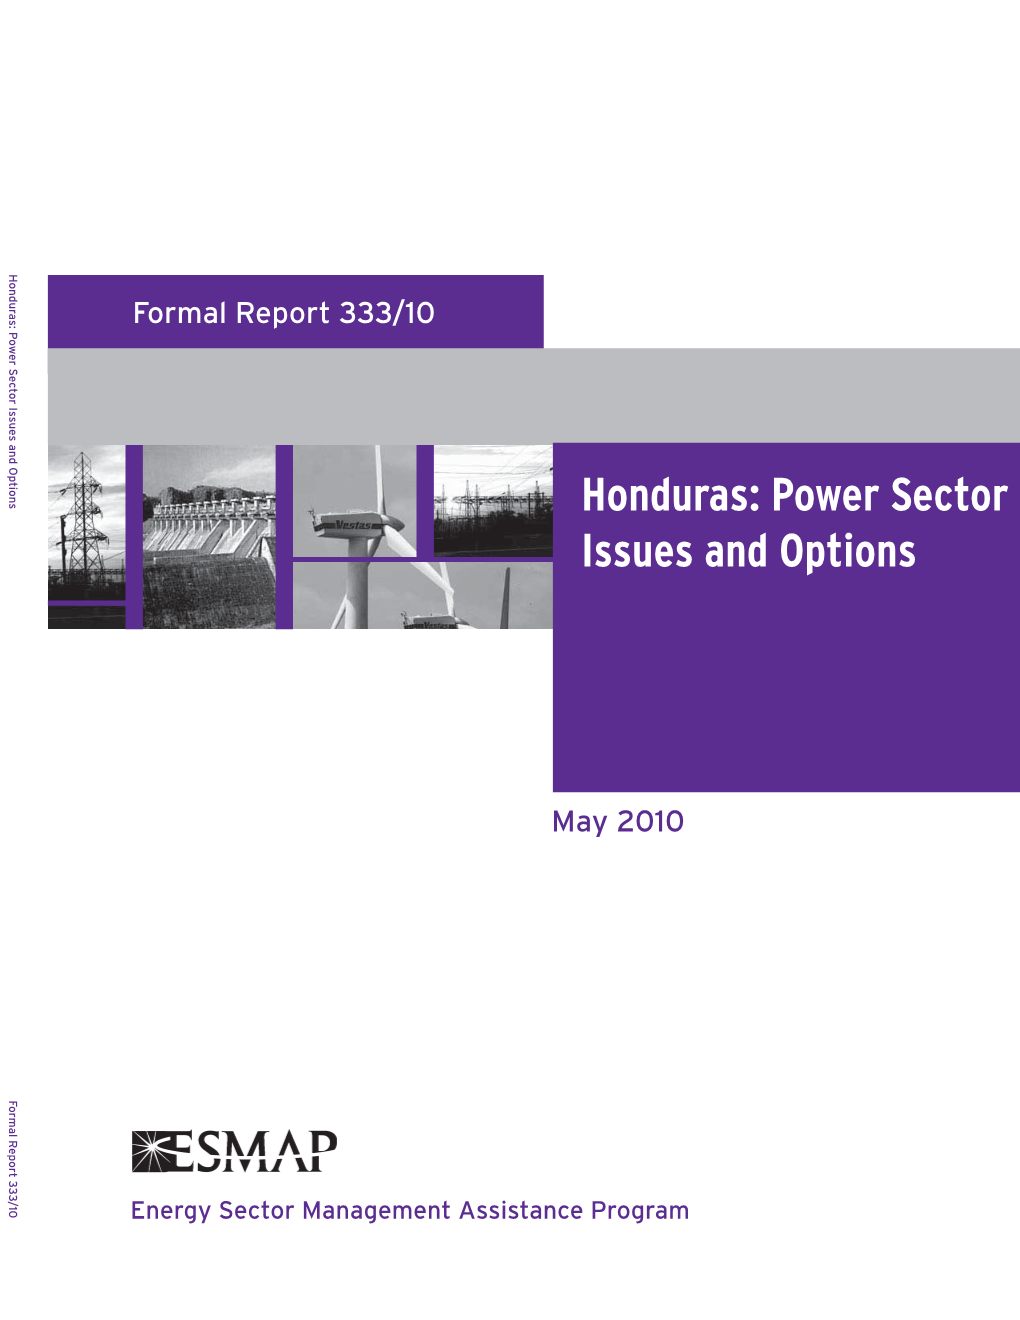 Honduras: Power Sector Issues and Options Formal Report 333/10